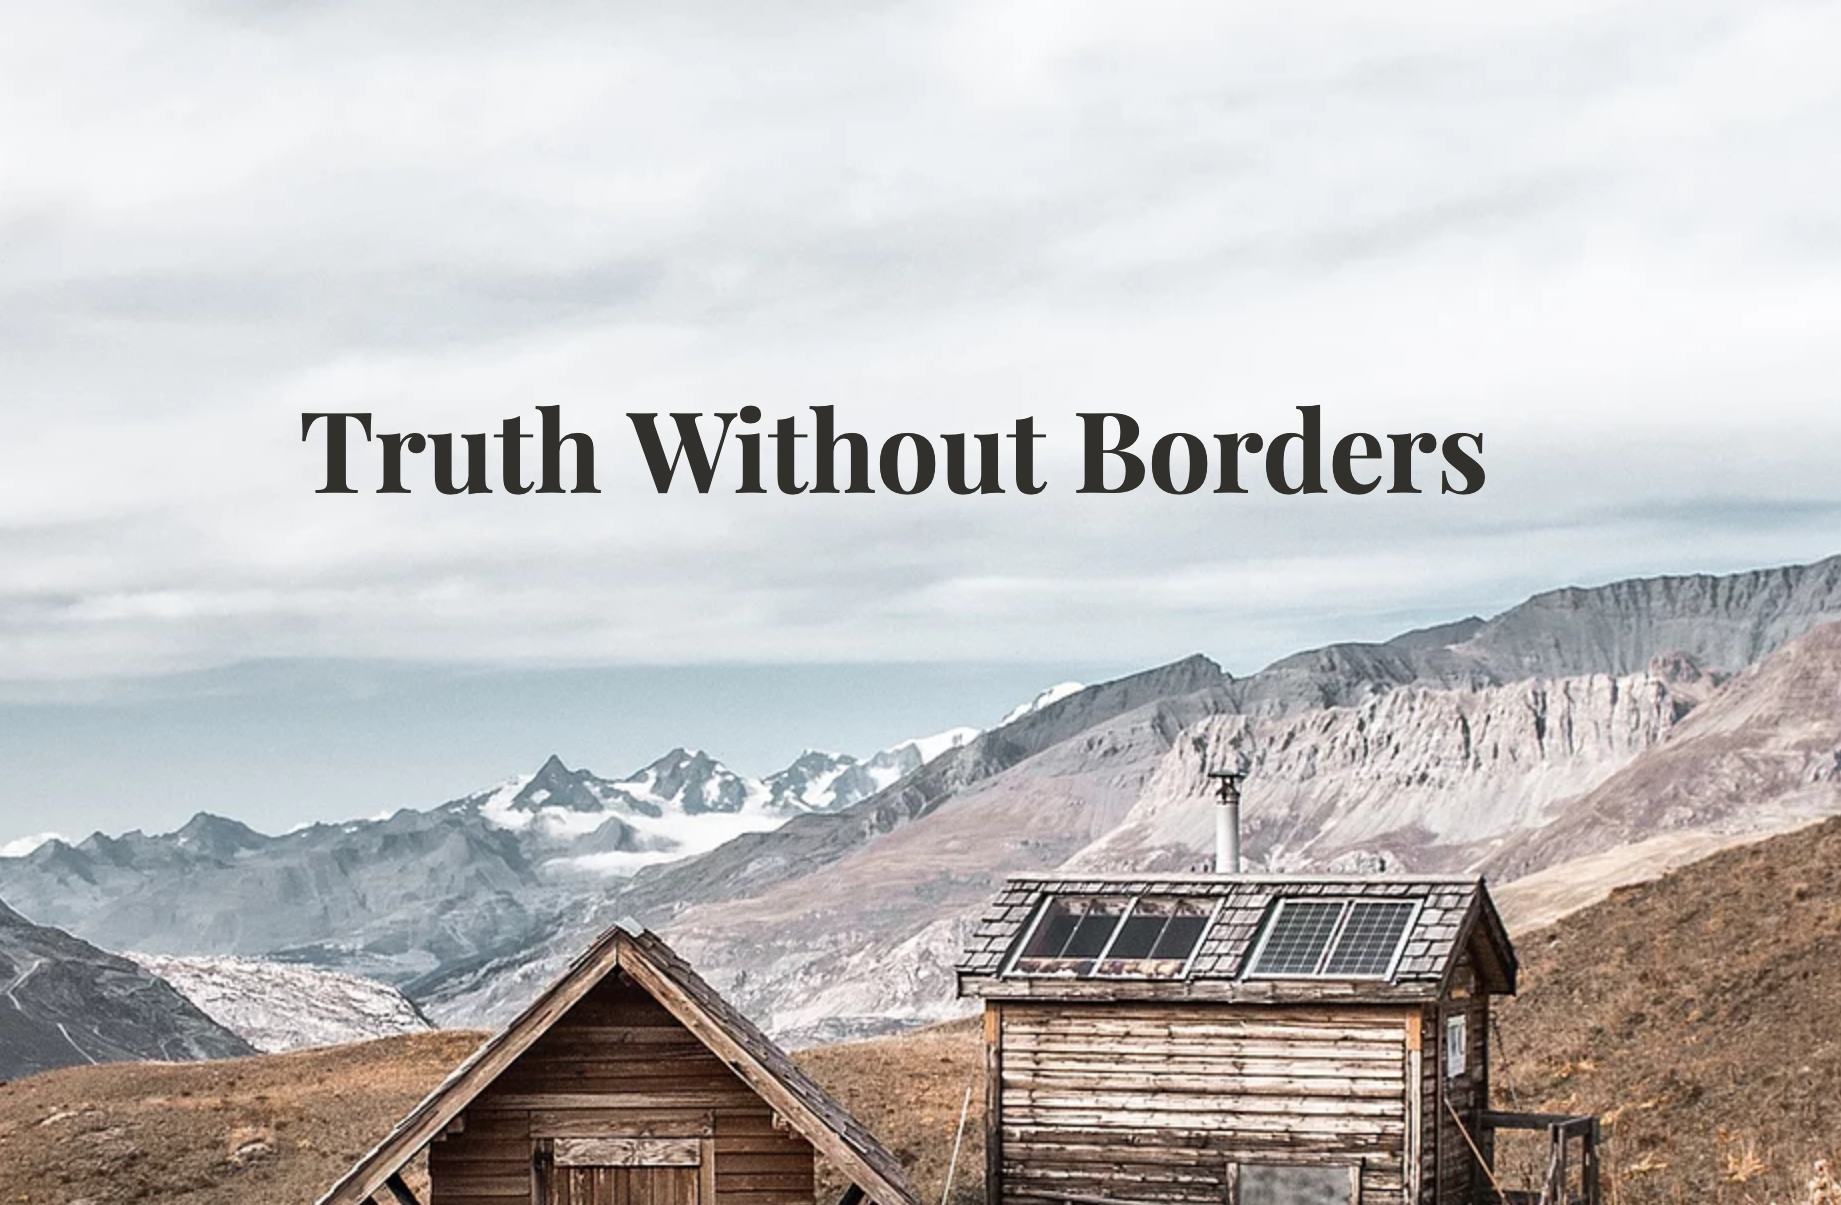 Cabins against mountains with 'Truth without Borders' overhanging it